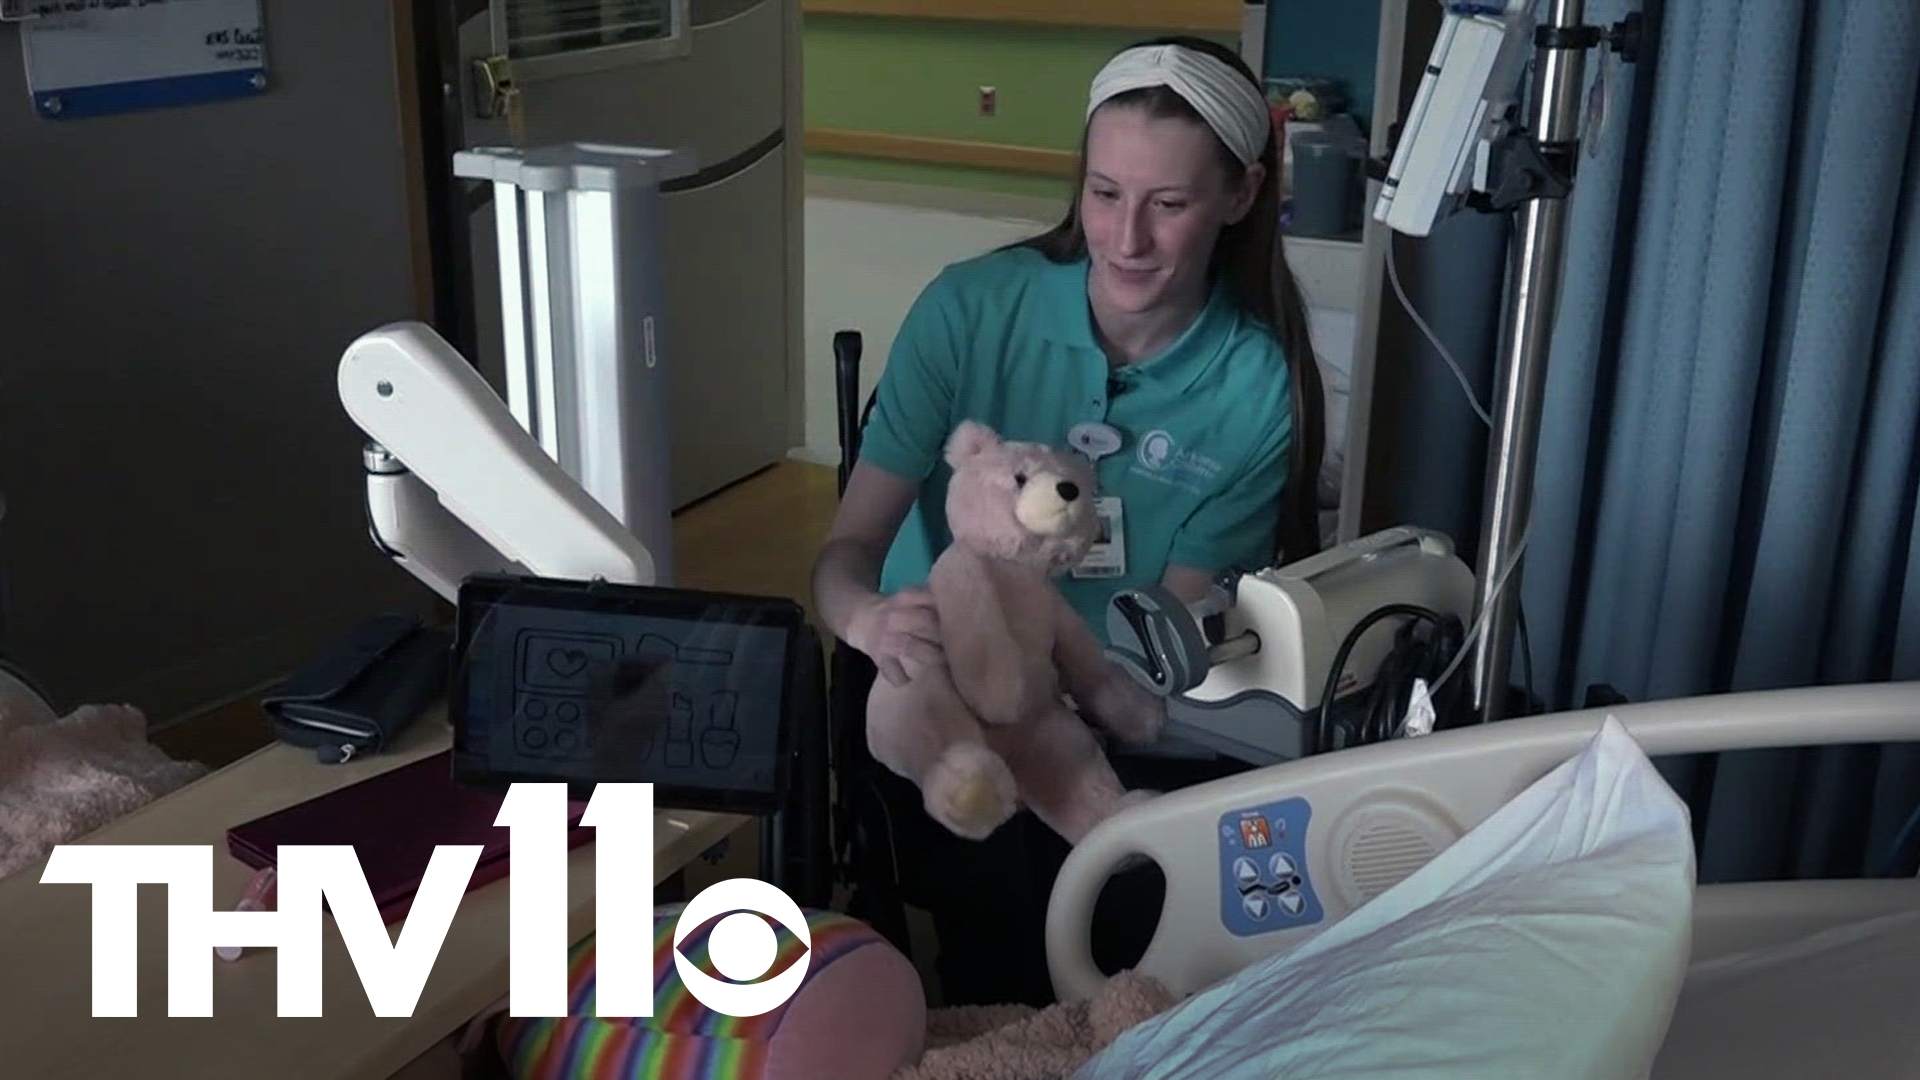 Bailey Hunter volunteers at Arkansas Children’s Hospital and uses a wheelchair made by the staff to make work less challenging.